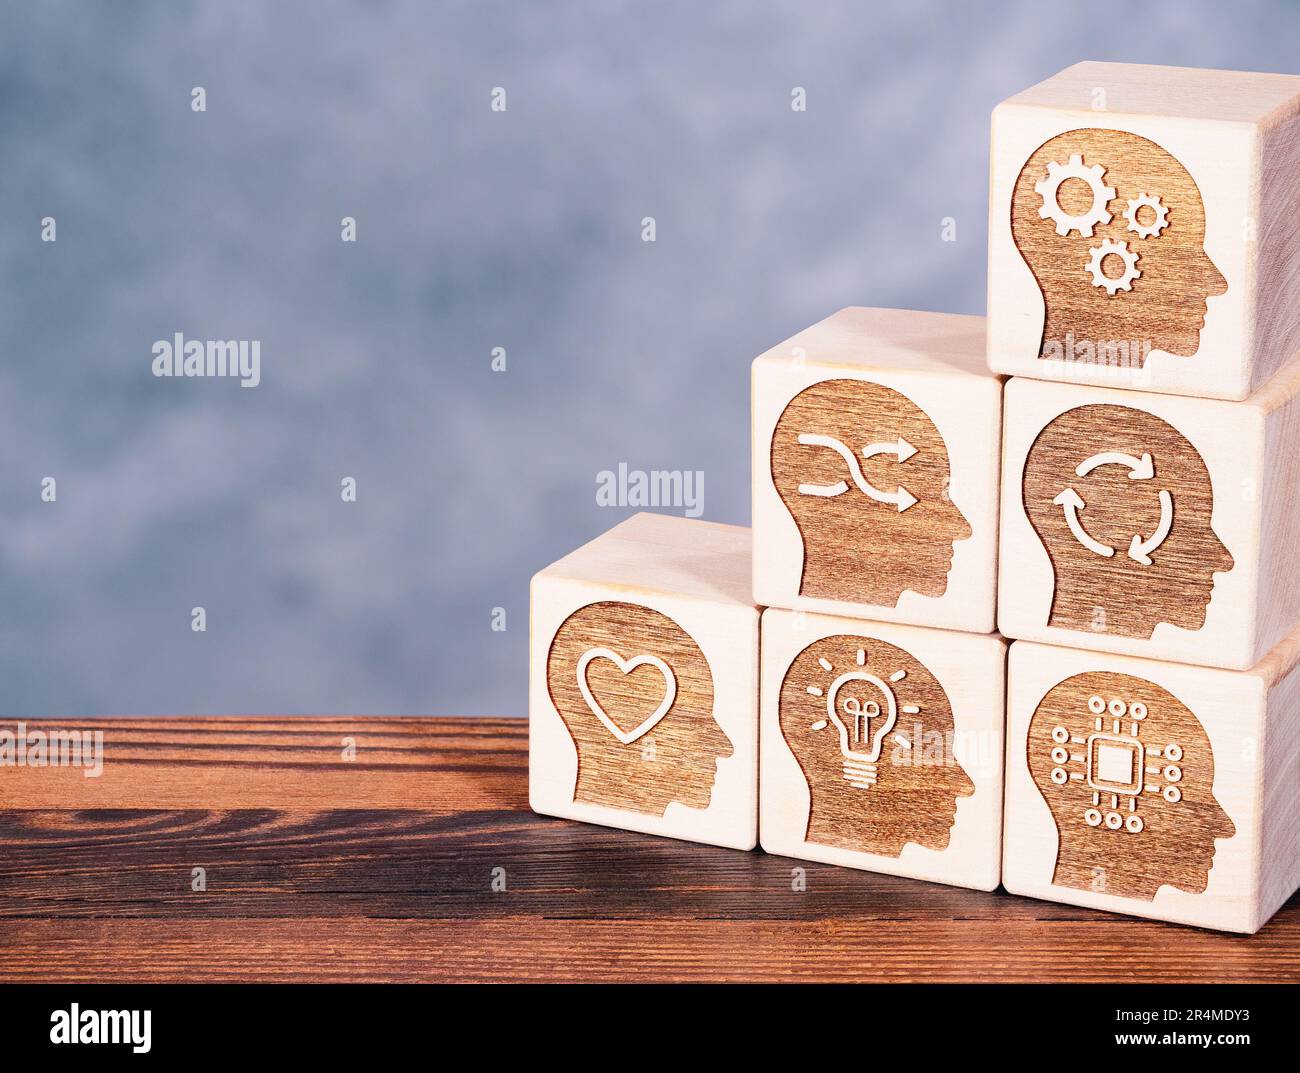 Soft power skills symbols on wooden cubes as concept of enhanced management capability Stock Photo